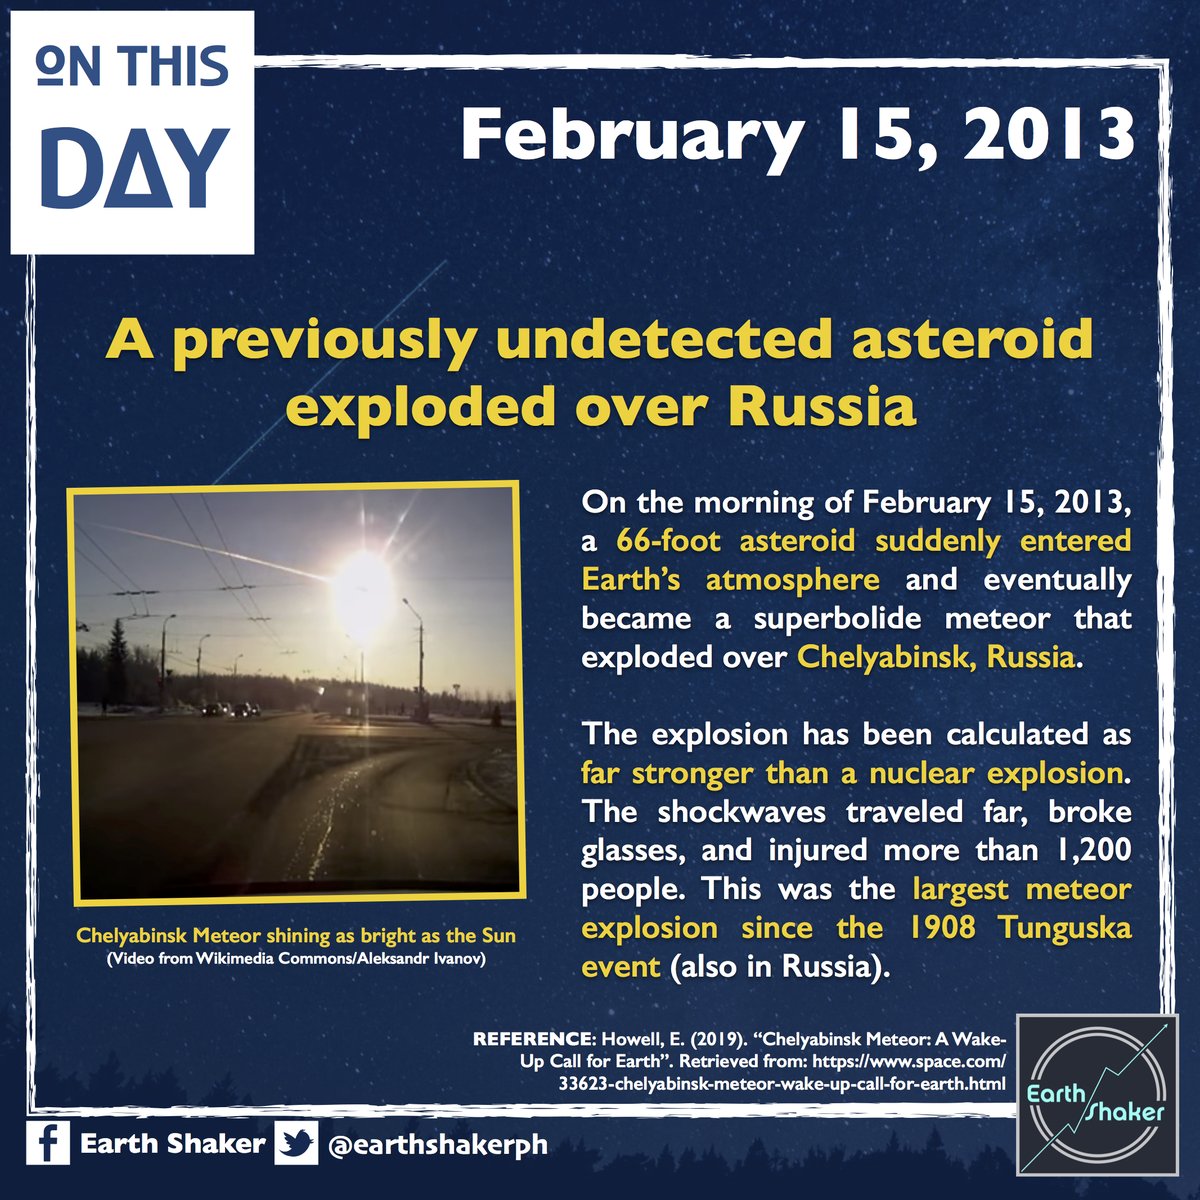 Earth Shaker Ph Onthisday In 13 An Undetected Asteroid Entered The Earth S Atmosphere Exploded And Injured More Than 1 0 People In Russia The Fact That It Was Undetected Before It